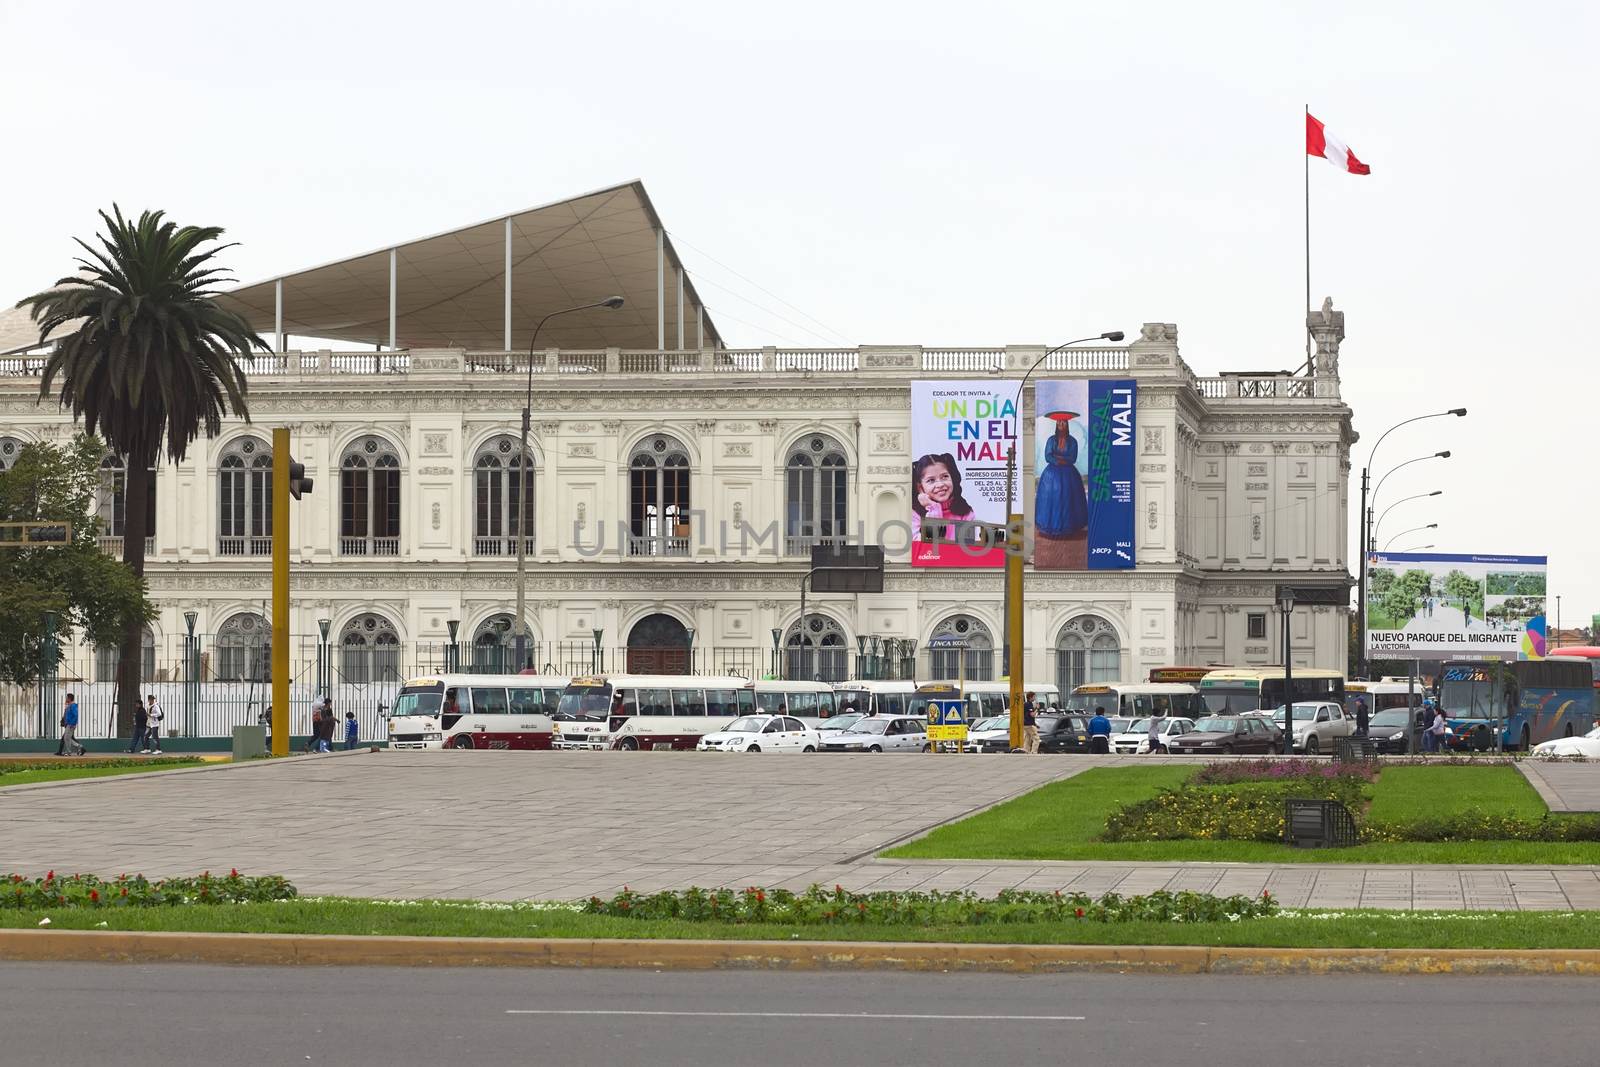 LIMA, PERU - JULY 21, 2013: MALI, the Art Museum of Lima in the Parque de la Exposicion in the city center with Plaza Grau in the front on July 21, 2013 in Lima, Peru